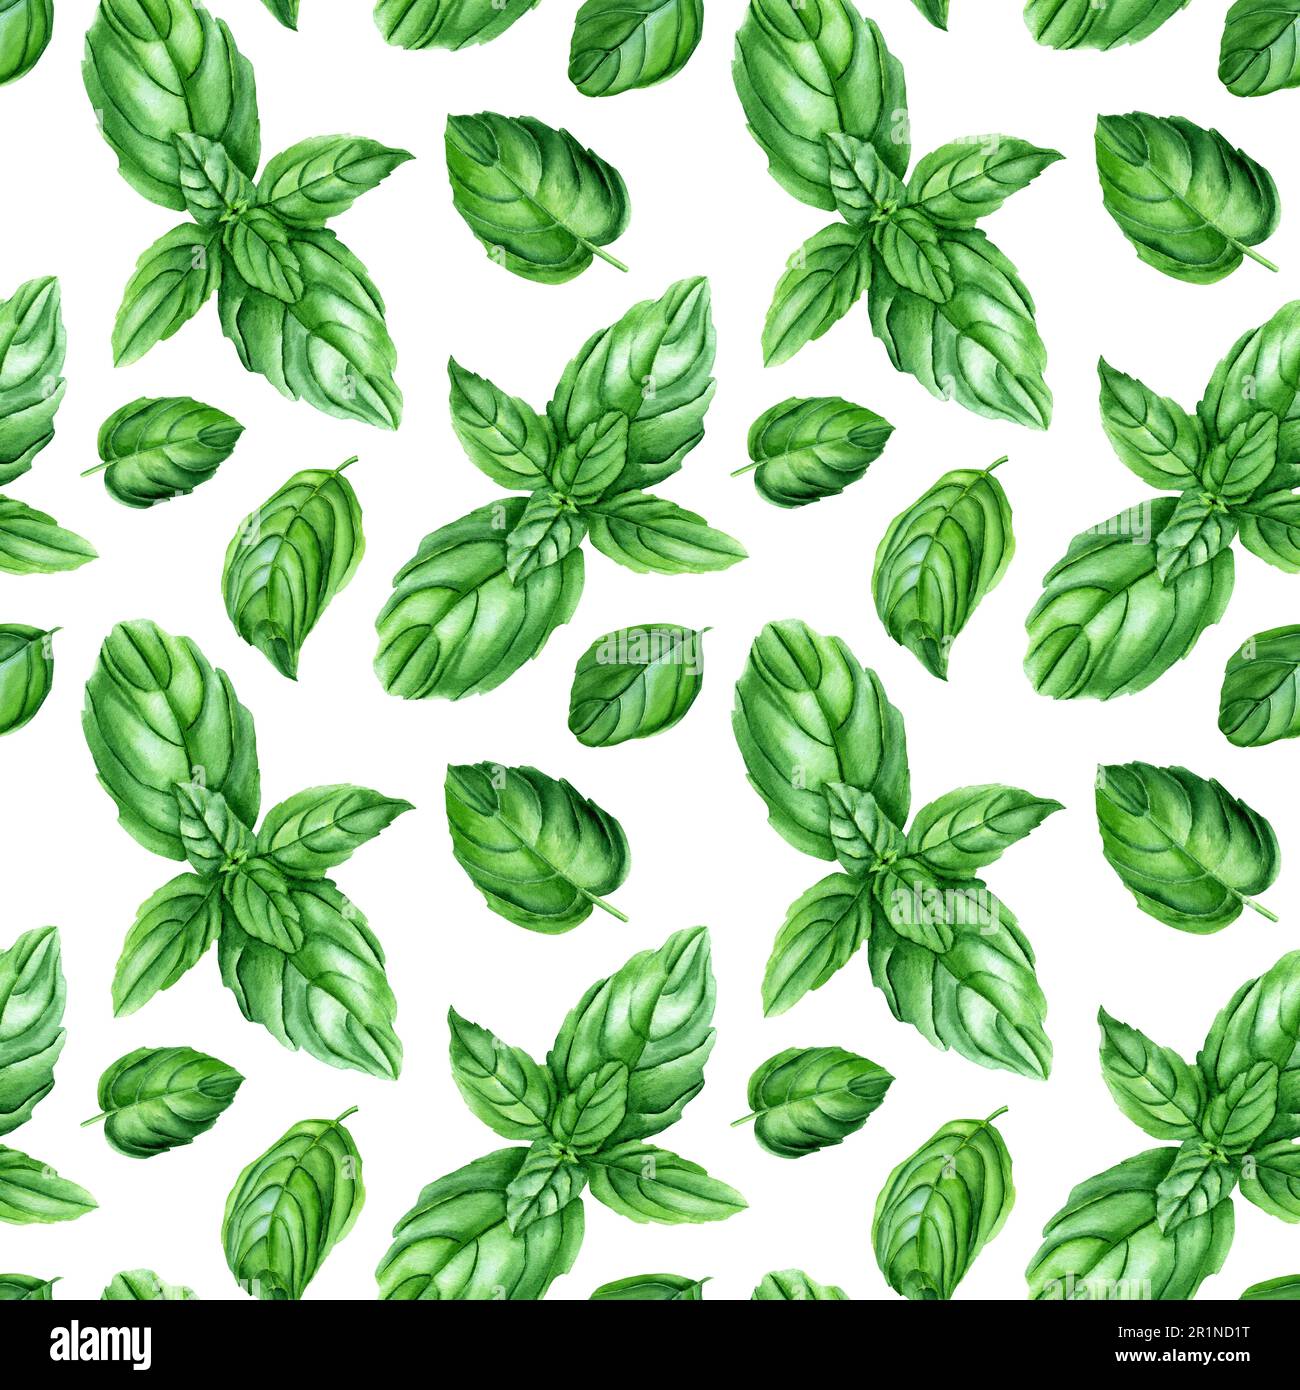 Watercolor seamless pattern with basil herb. Botanical illustration isolated on white for wrapping, wallpaper, fabric Stock Photo